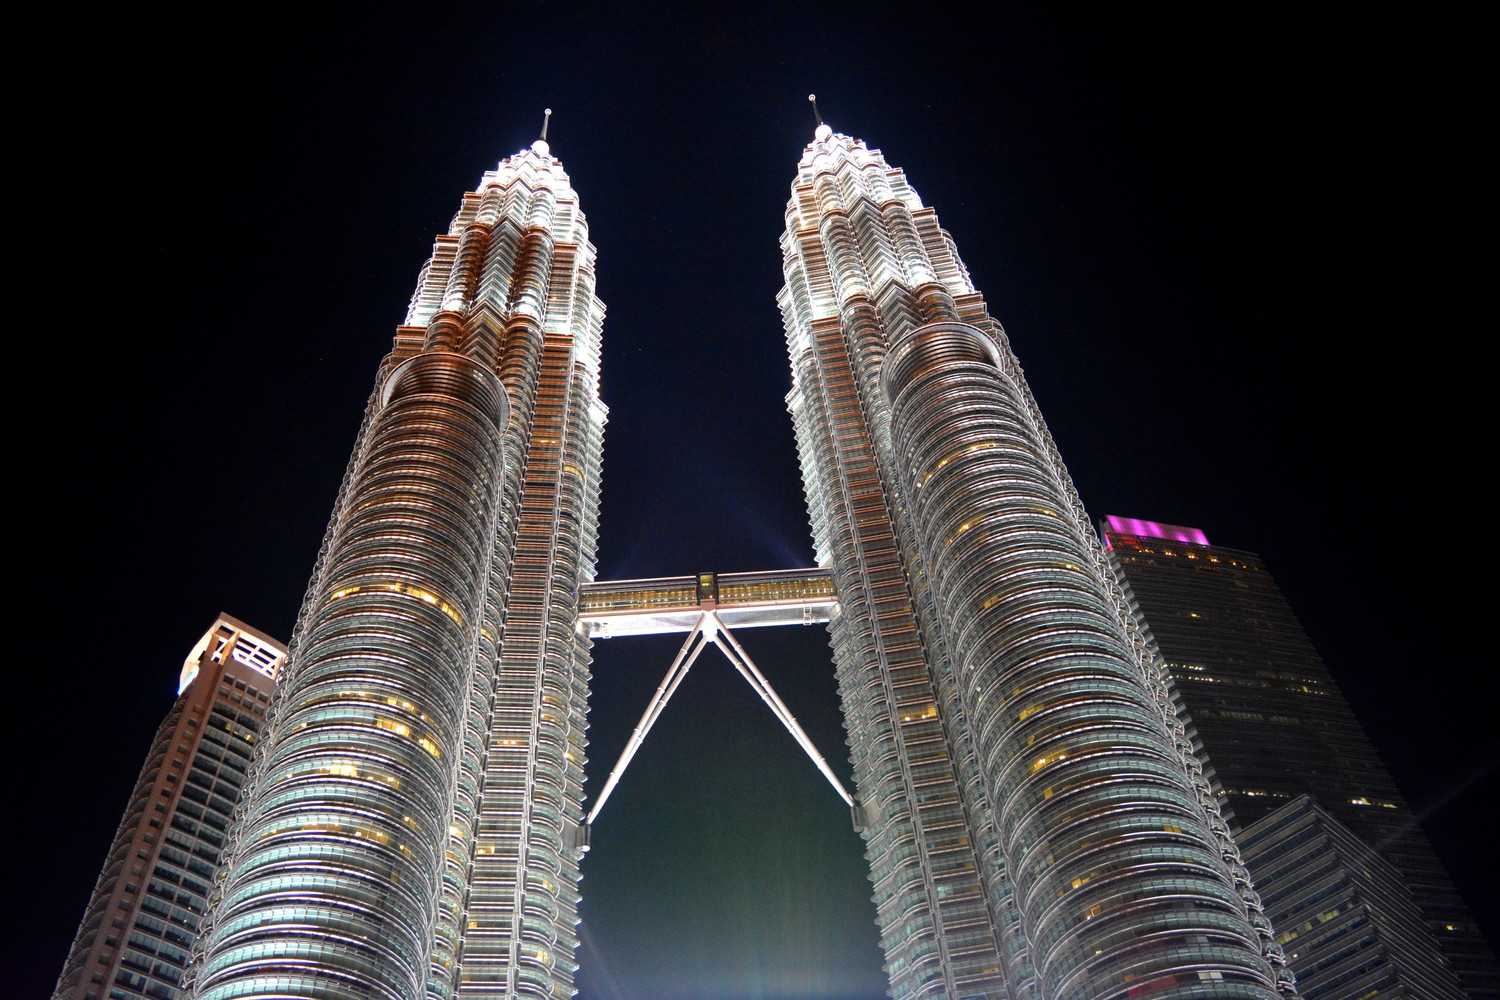 Petronas Twin Towers lit with lights in the evening